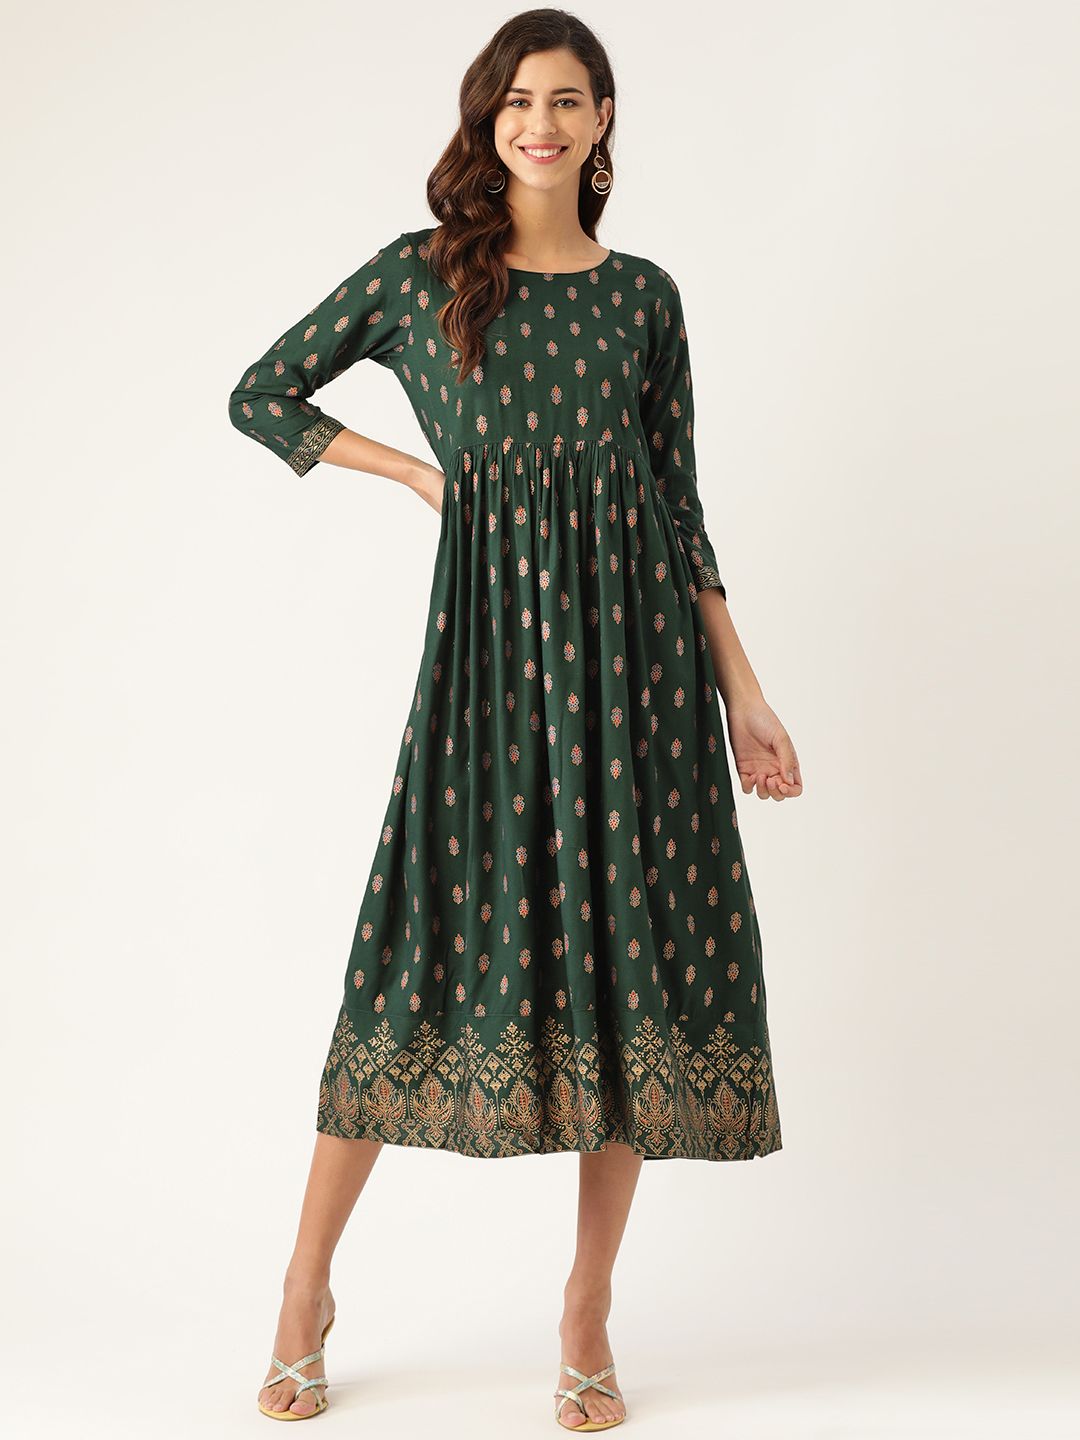 Shae by SASSAFRAS Green & Golden Ethnic Motifs Printed A-Line Midi Dress Price in India